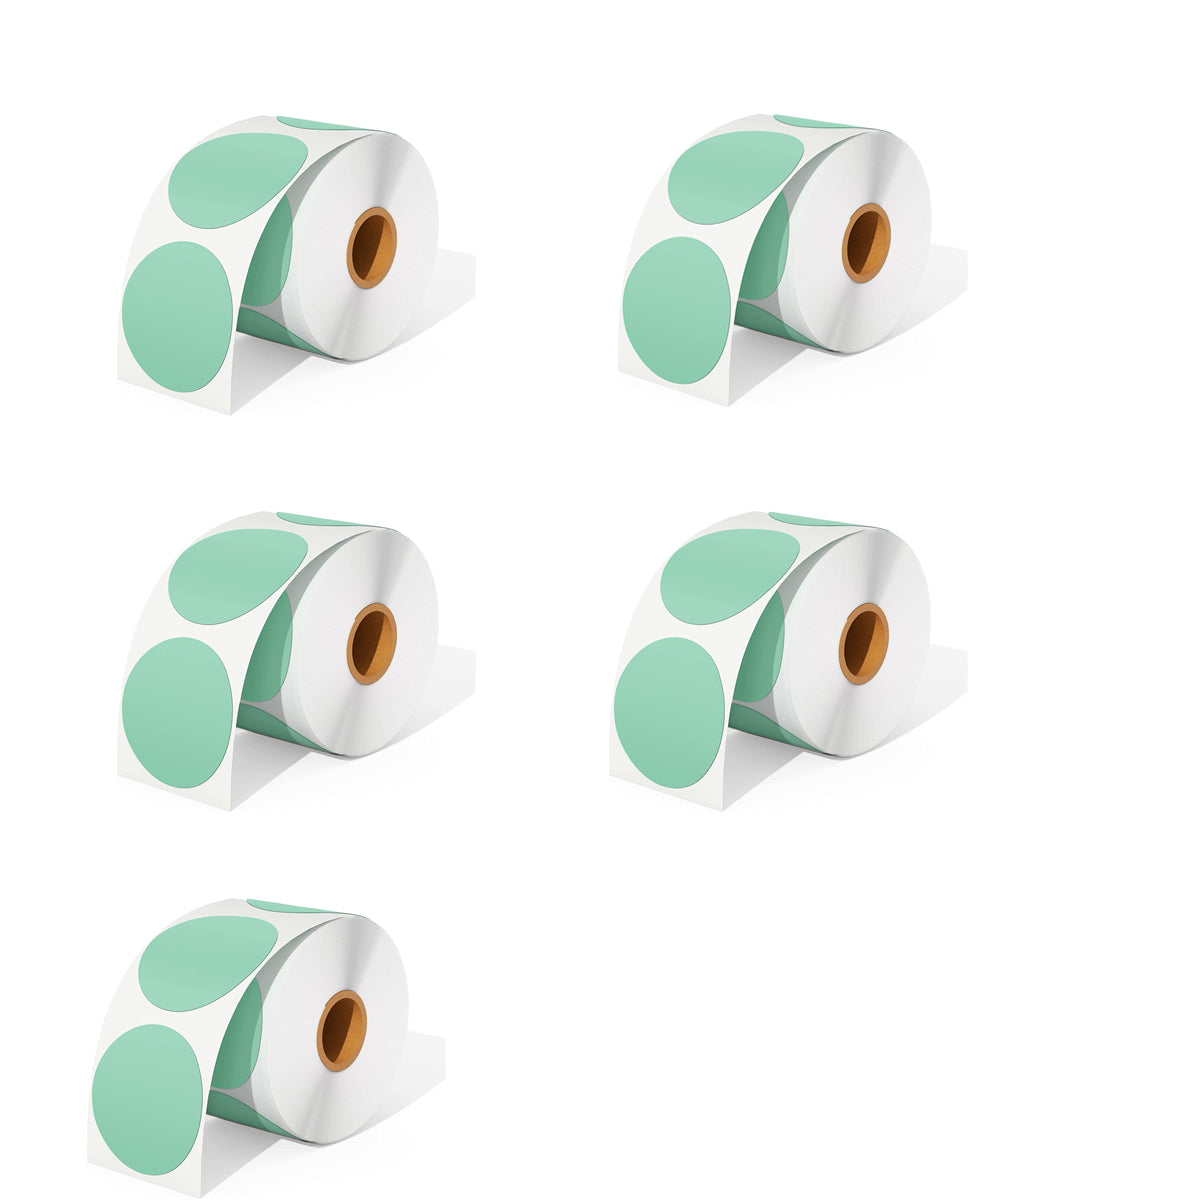 We offer five rolls of green direct thermal round labels as a kit, with 750 labels per roll.